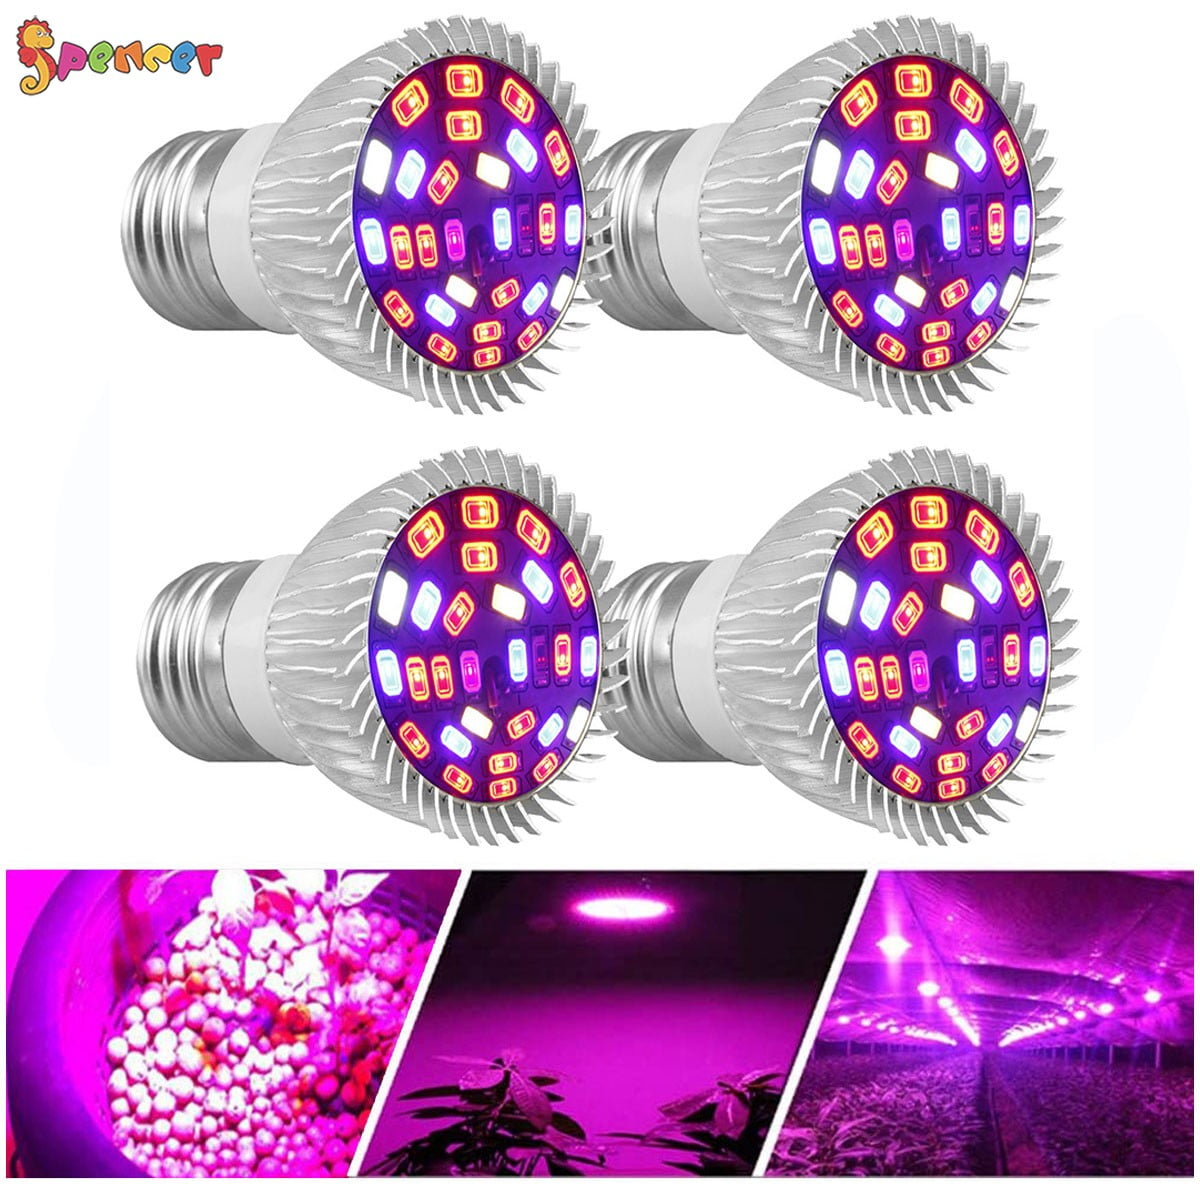 Details about   4 Pack 28W Hydroponic LED Plant Growing Lights Full Spectrum Bulbs Lamp E27 USA 